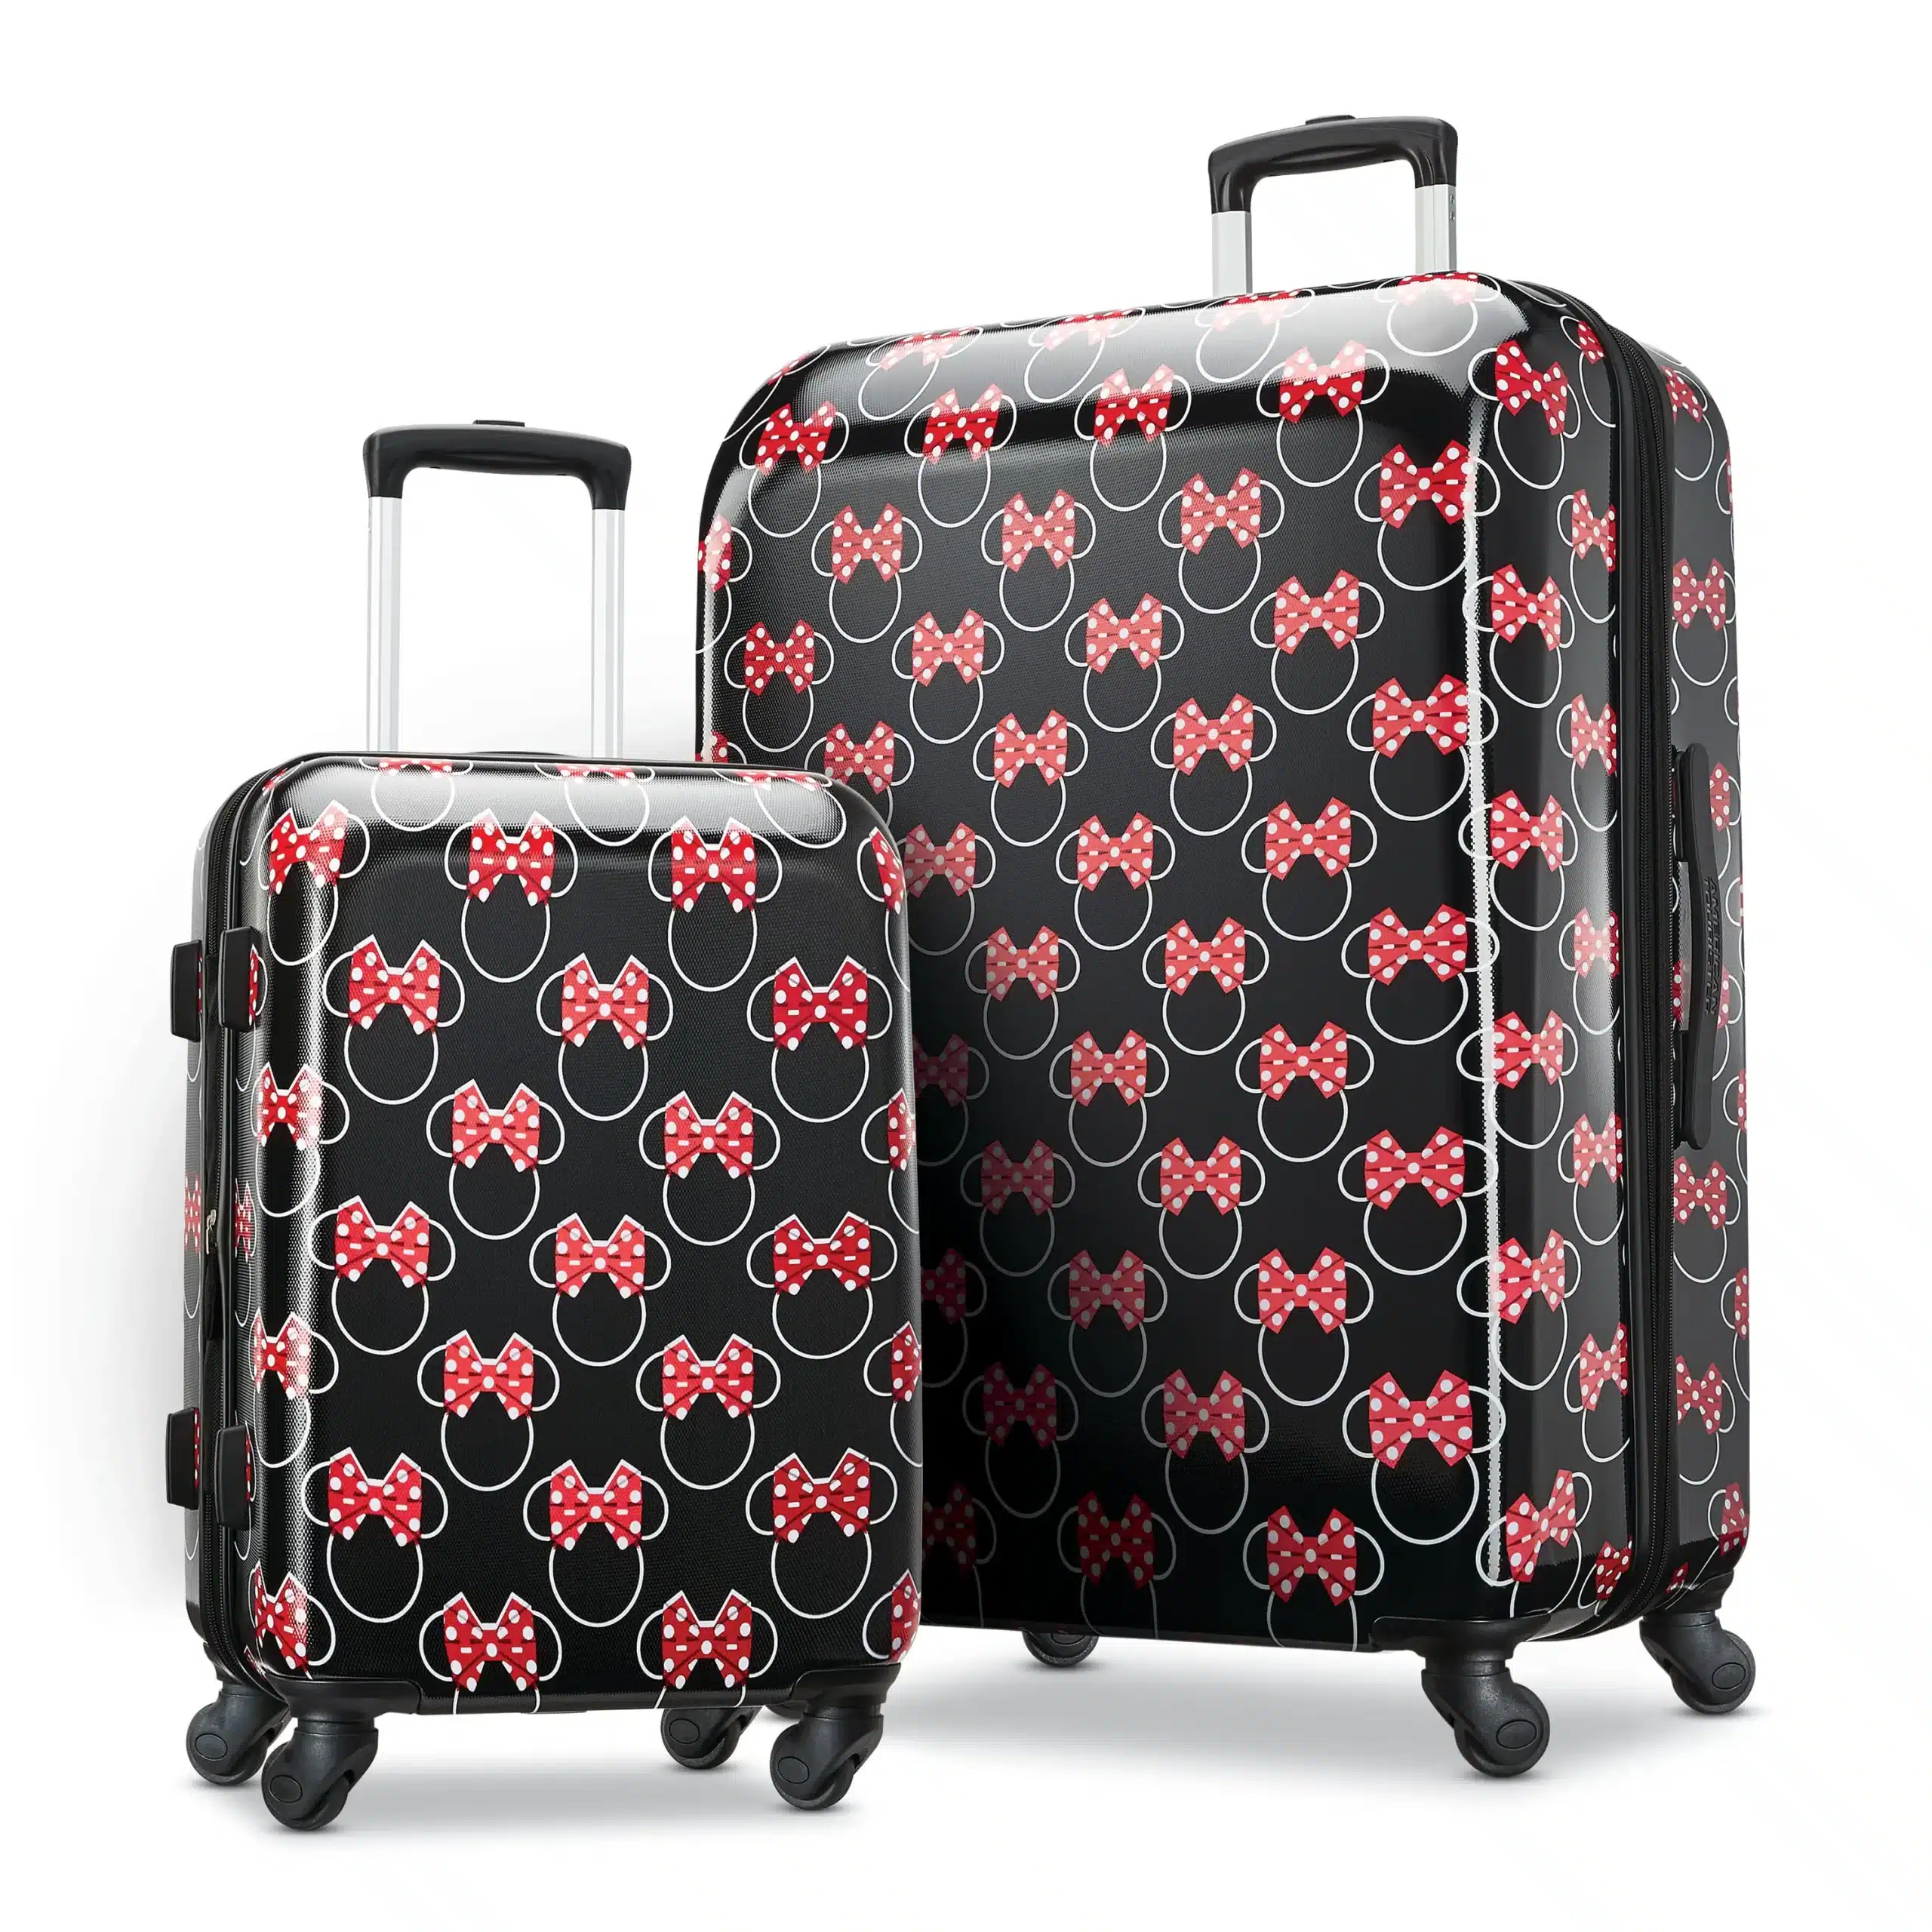 Oh Boy! We Review the Playful American Tourister Disney Luggage Collection